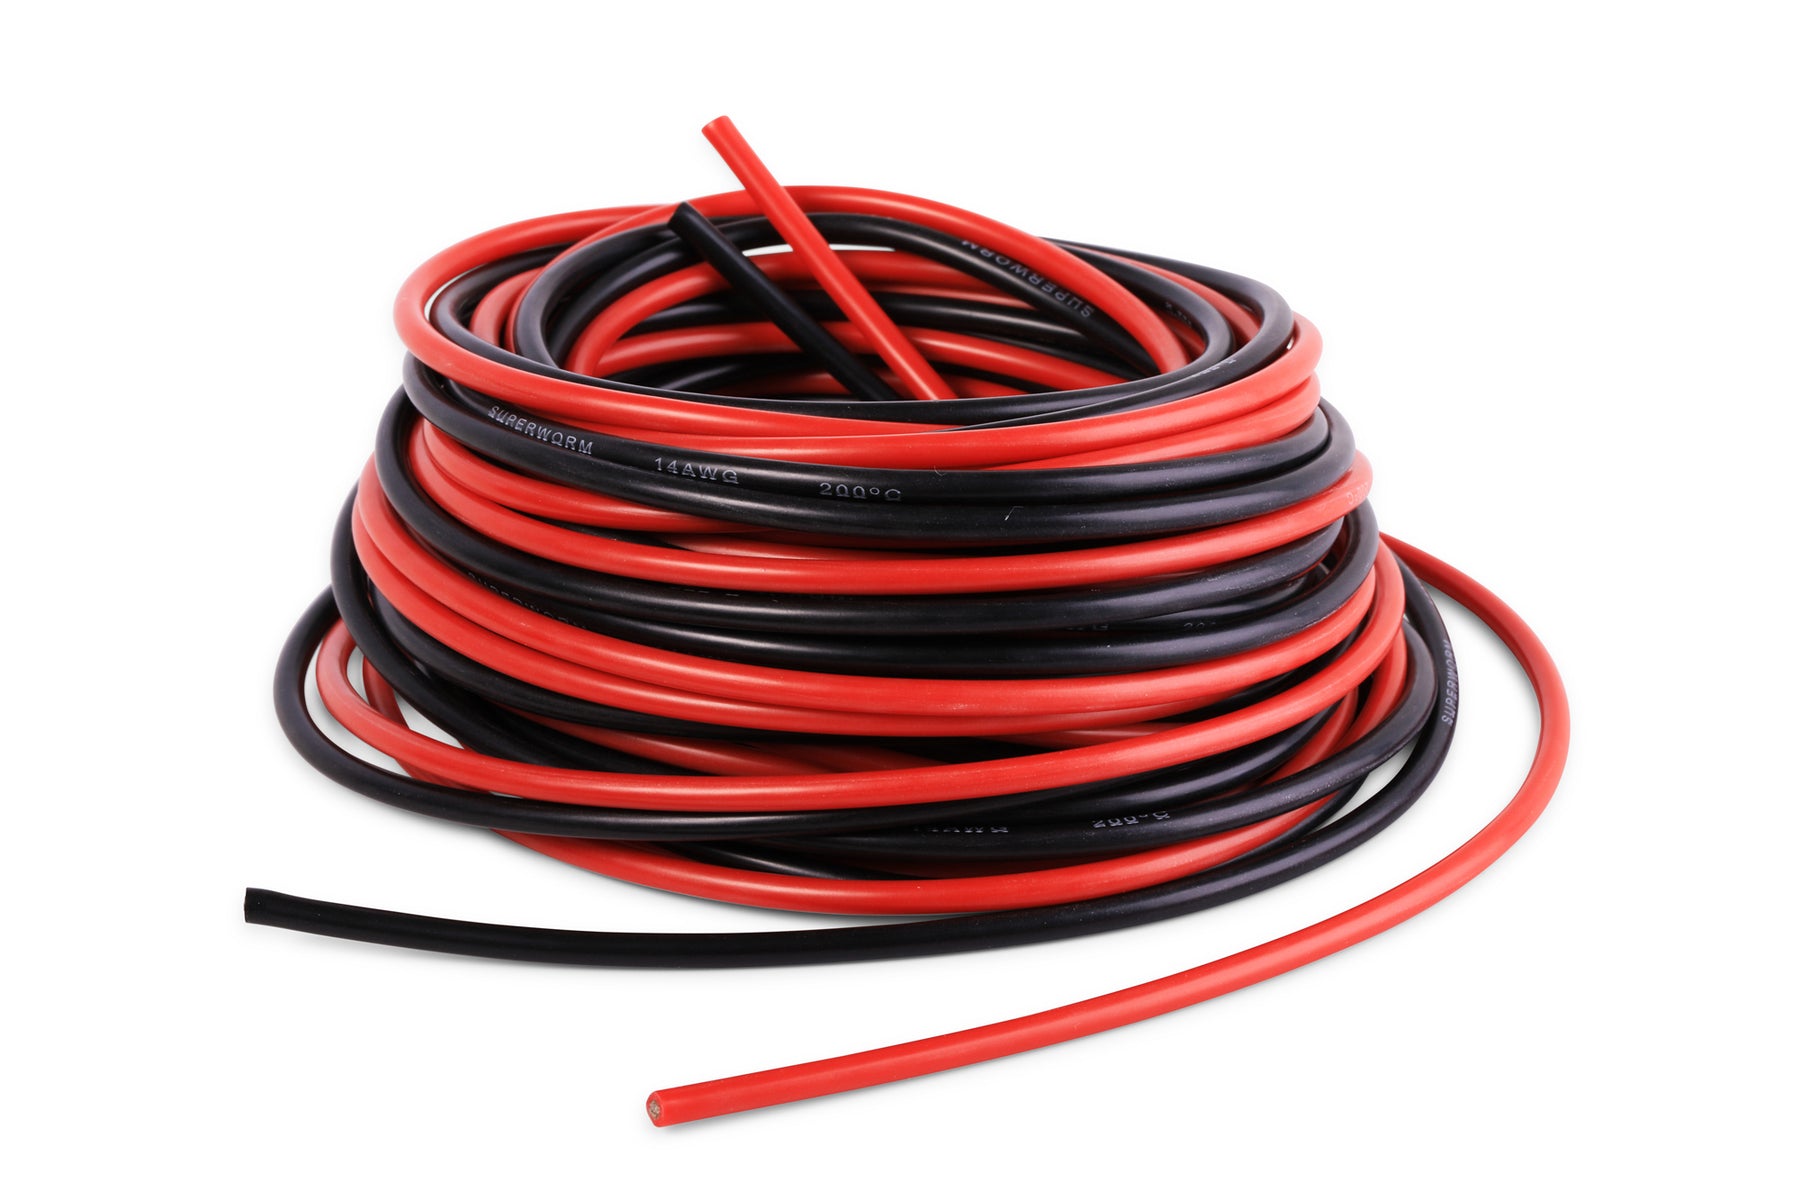 KVIZTY 6 AWG Wire - Super Flexible Silicone Wire (5ft Black + 5ft Red) 6  Gauge Stranded Tinned Copper Wire - Car Automotive Wire - RC Battery Wire 